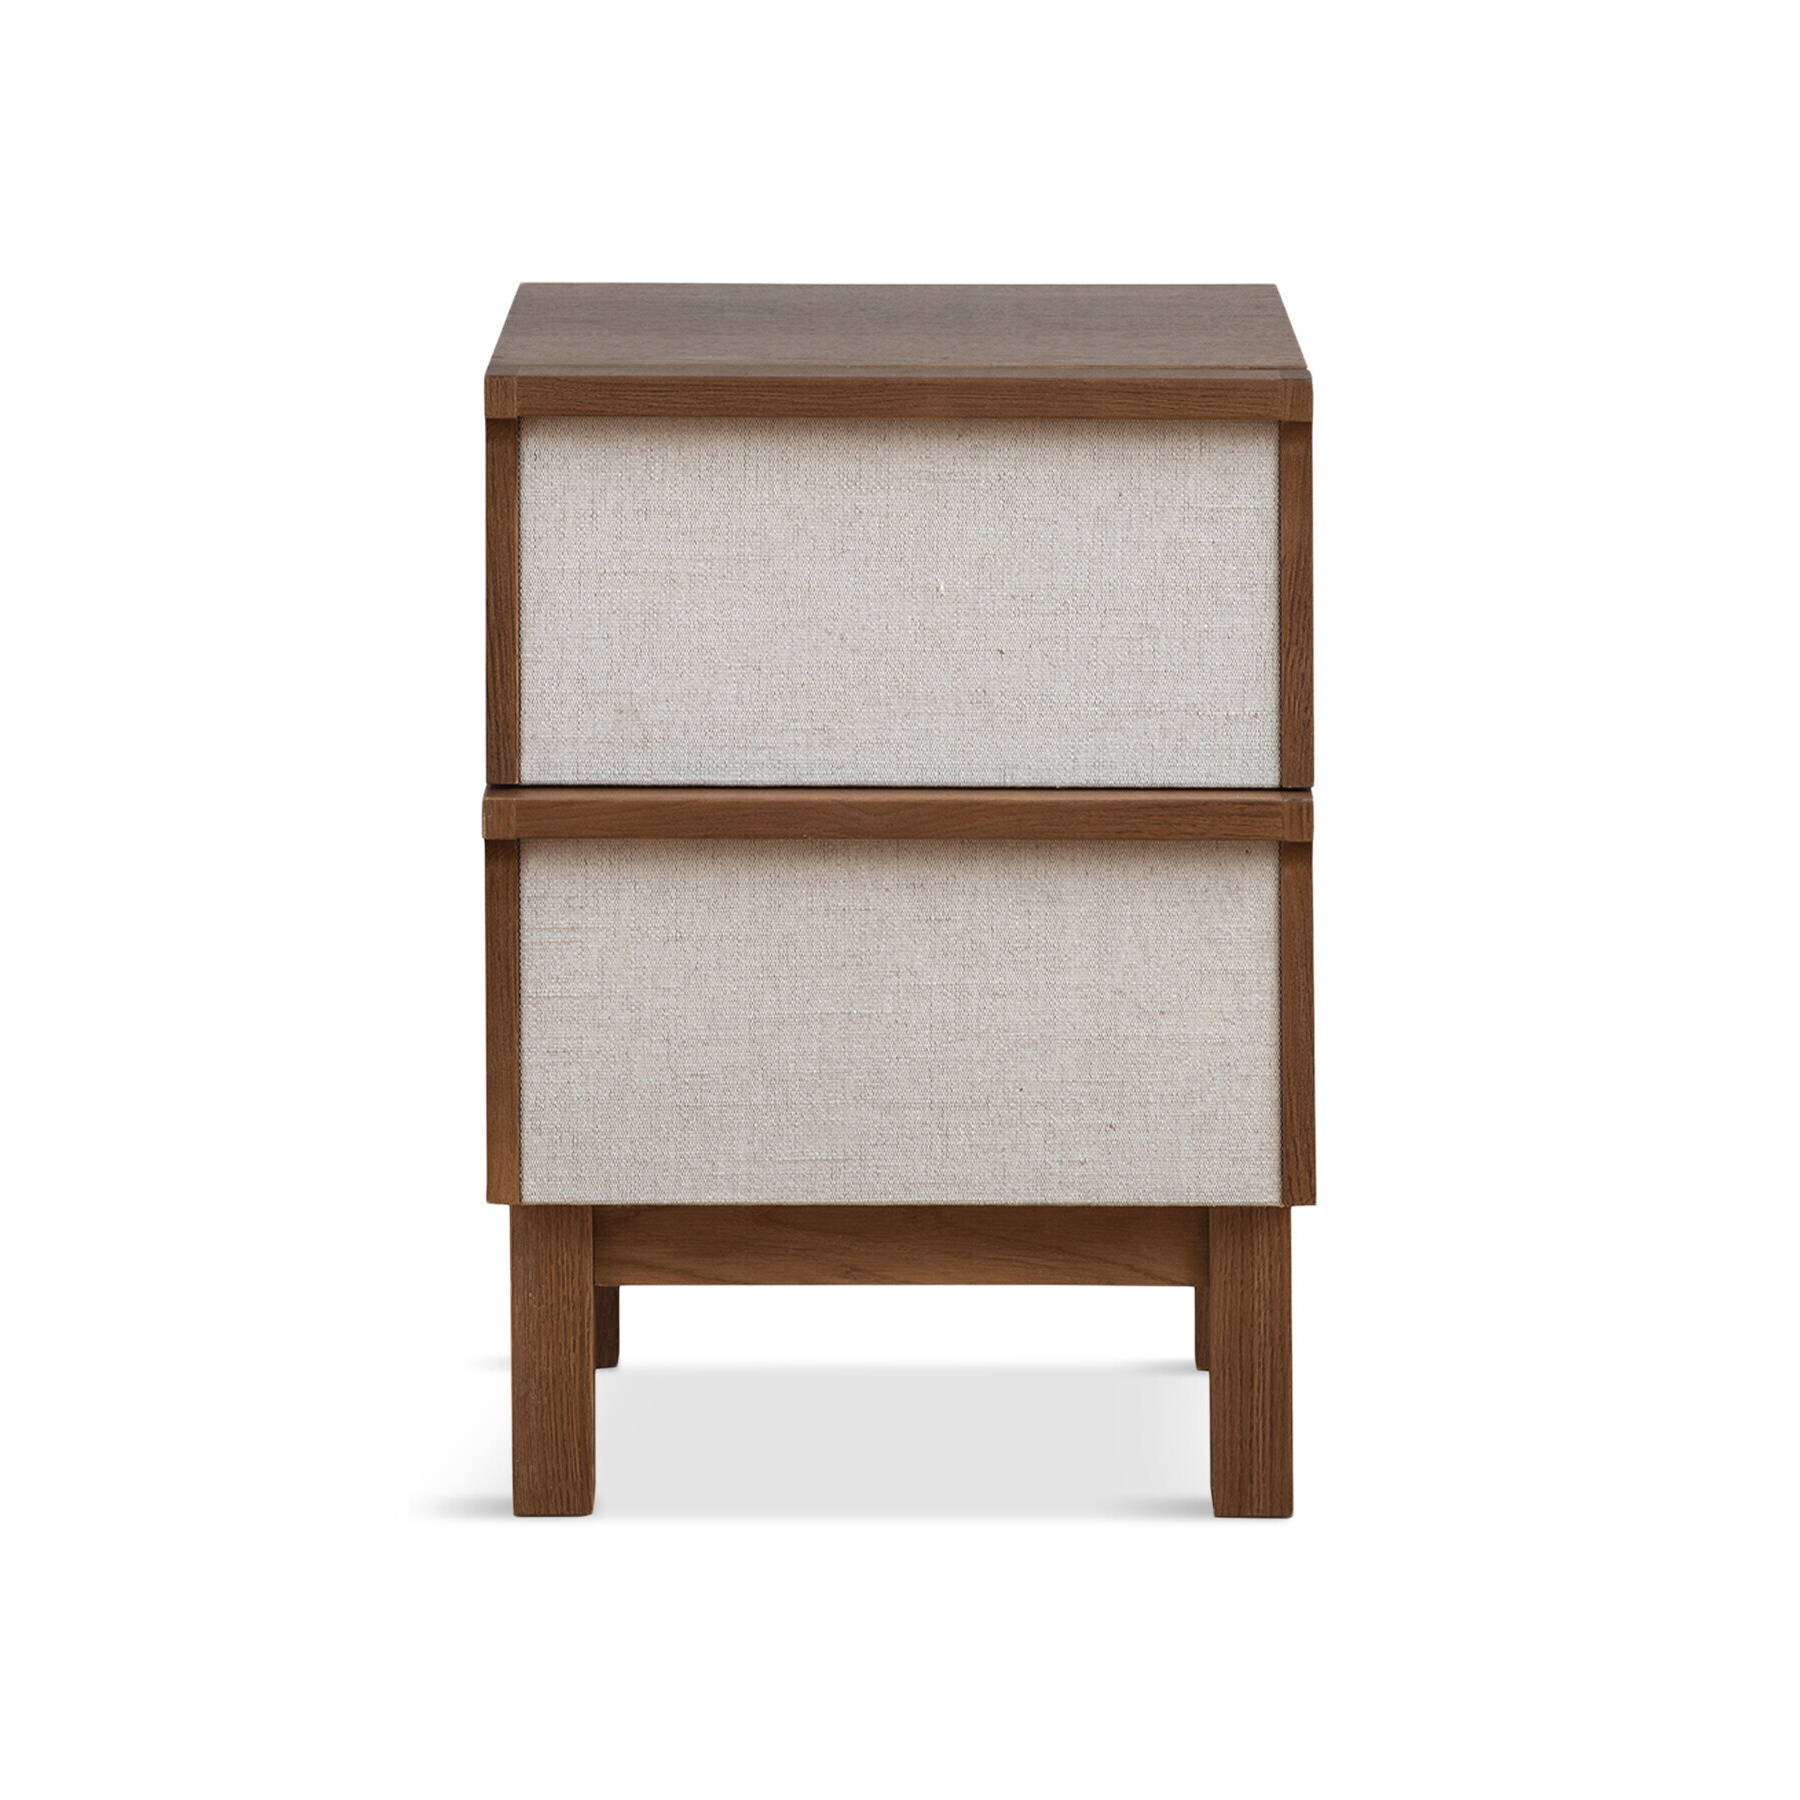 Heal's Marna Bedside Table - Size 40x39x60 Cream - image 1